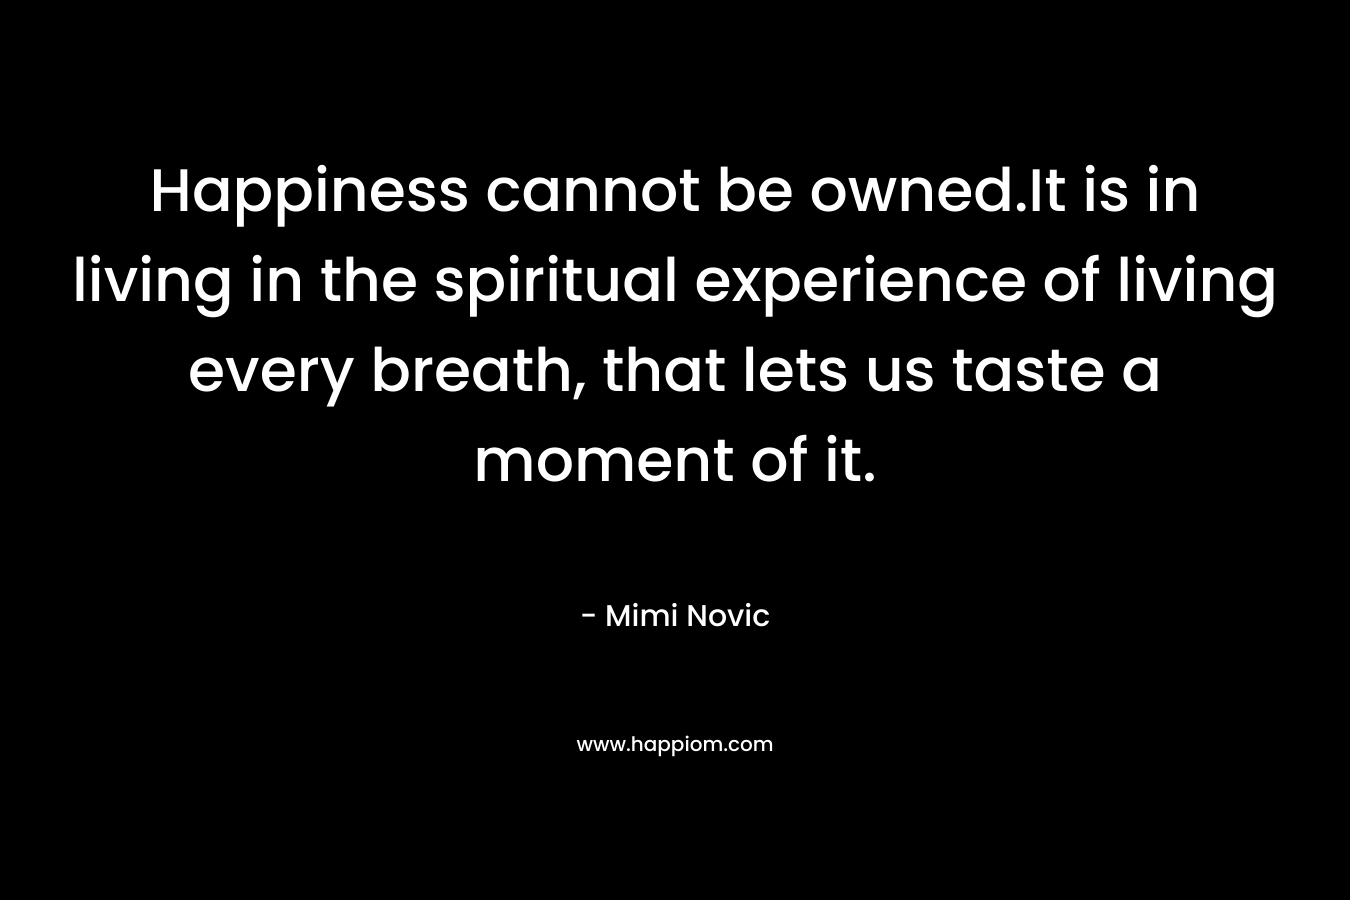 Happiness cannot be owned.It is in living in the spiritual experience of living every breath, that lets us taste a moment of it. – Mimi Novic